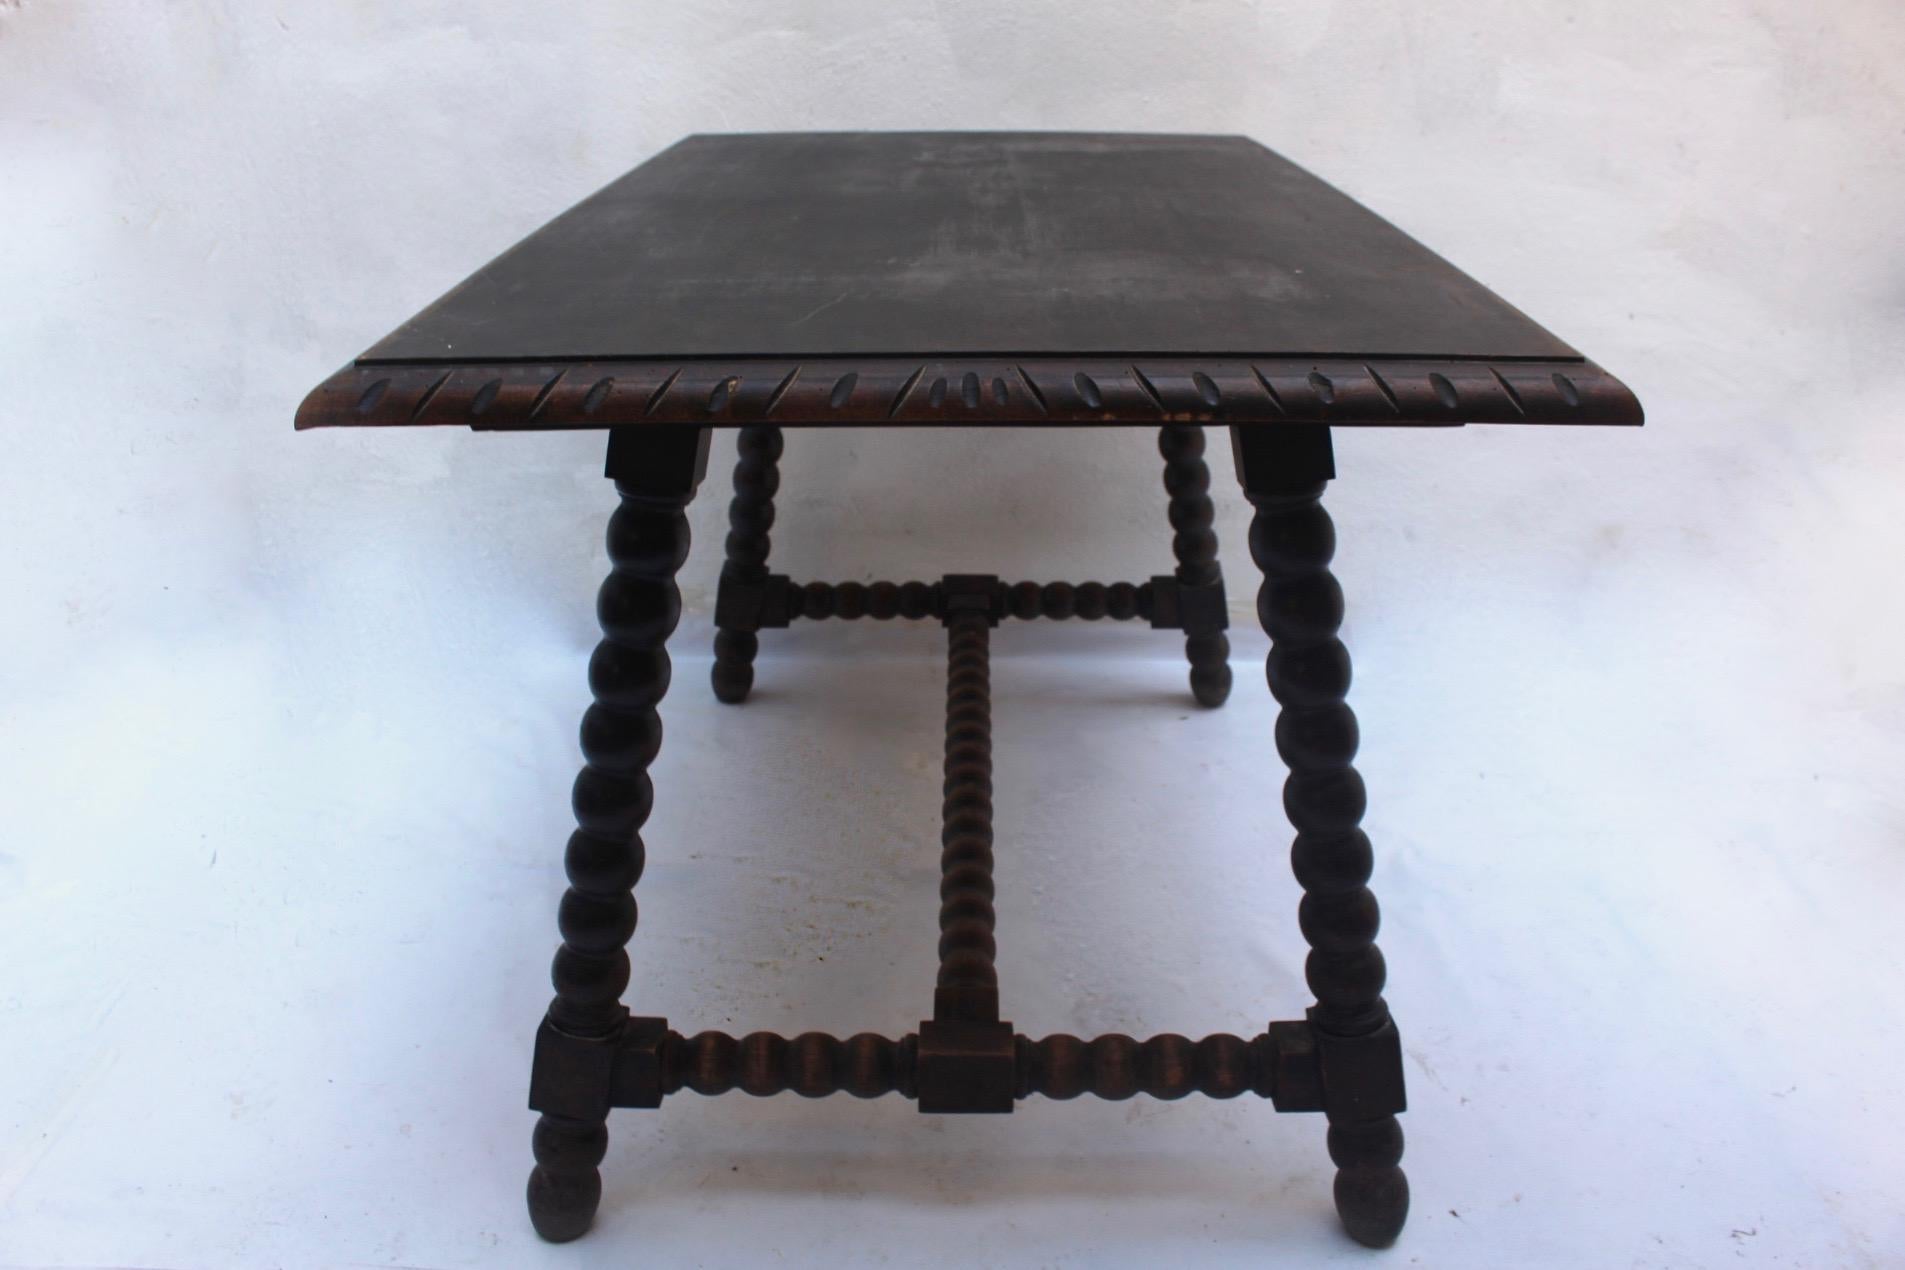 Baroque Revival Wood Dining Table Made in Spain, 19th Century 4